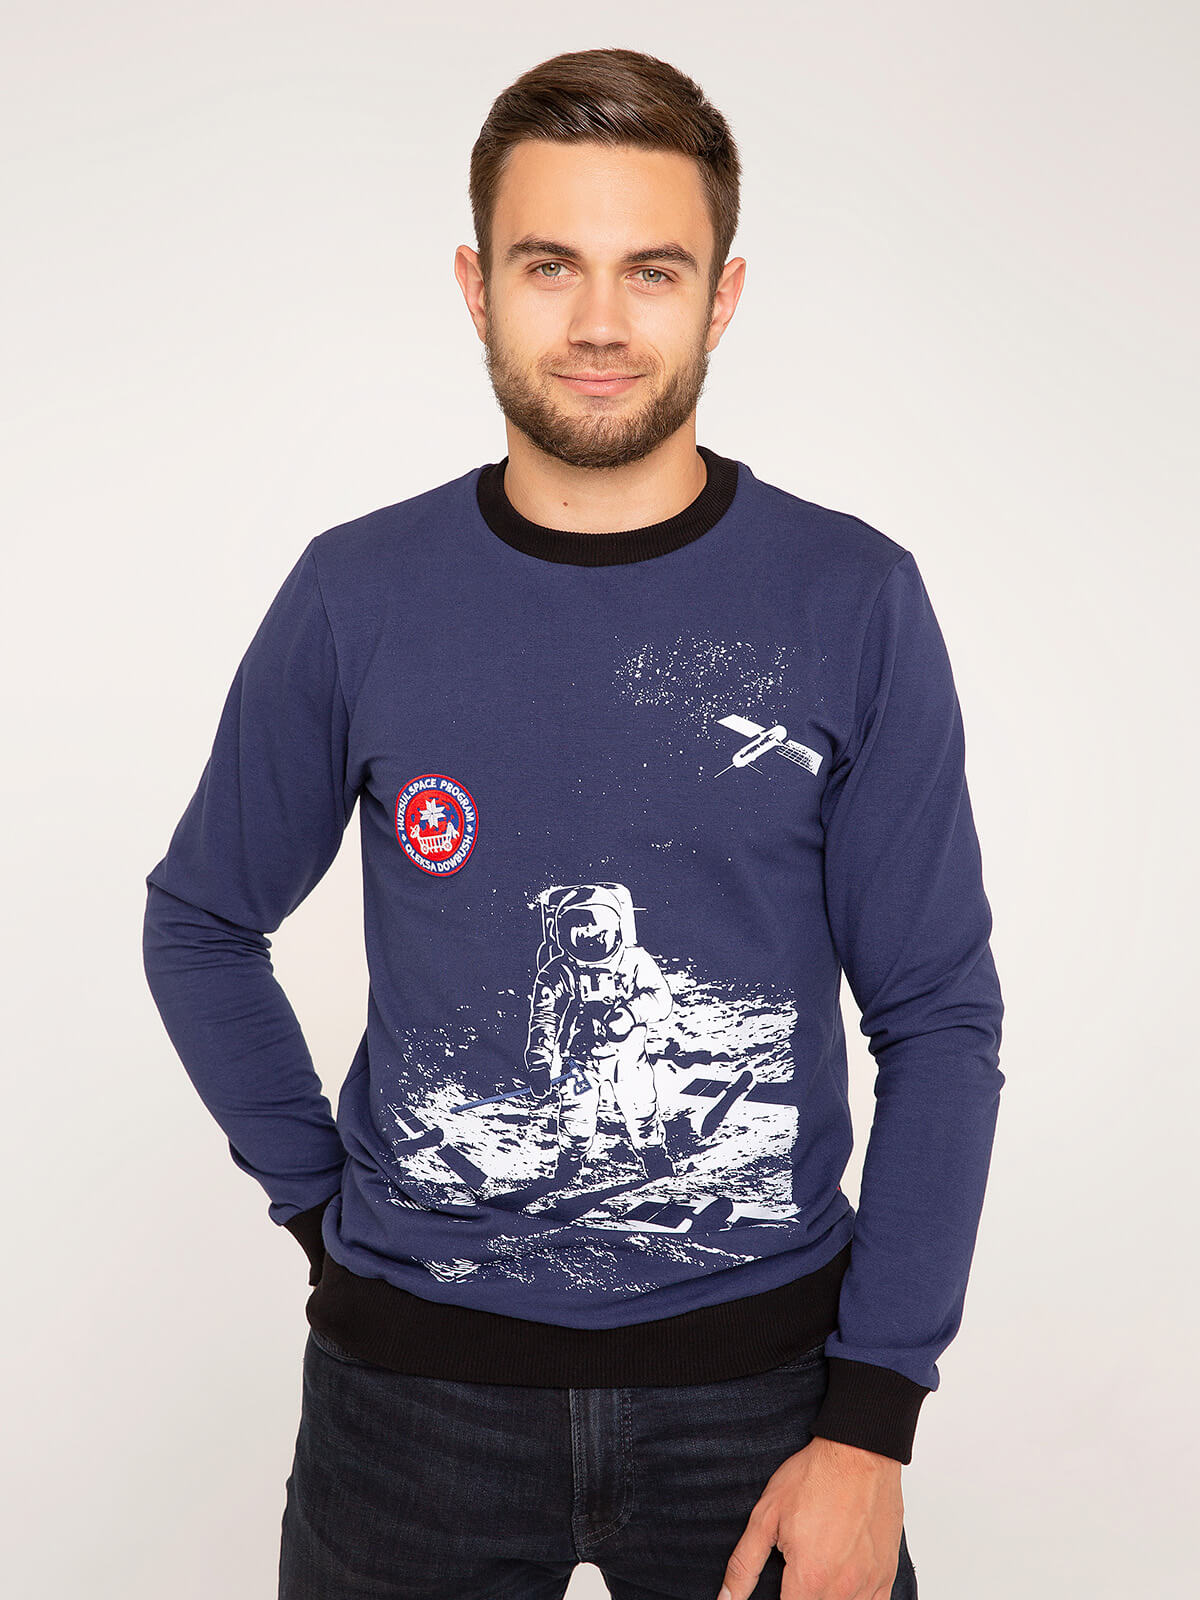 Men's Long Sleeve Hutsul Space Program. Color navy blue. Material: 75% cotton, 21% polyester, 4% spandex.